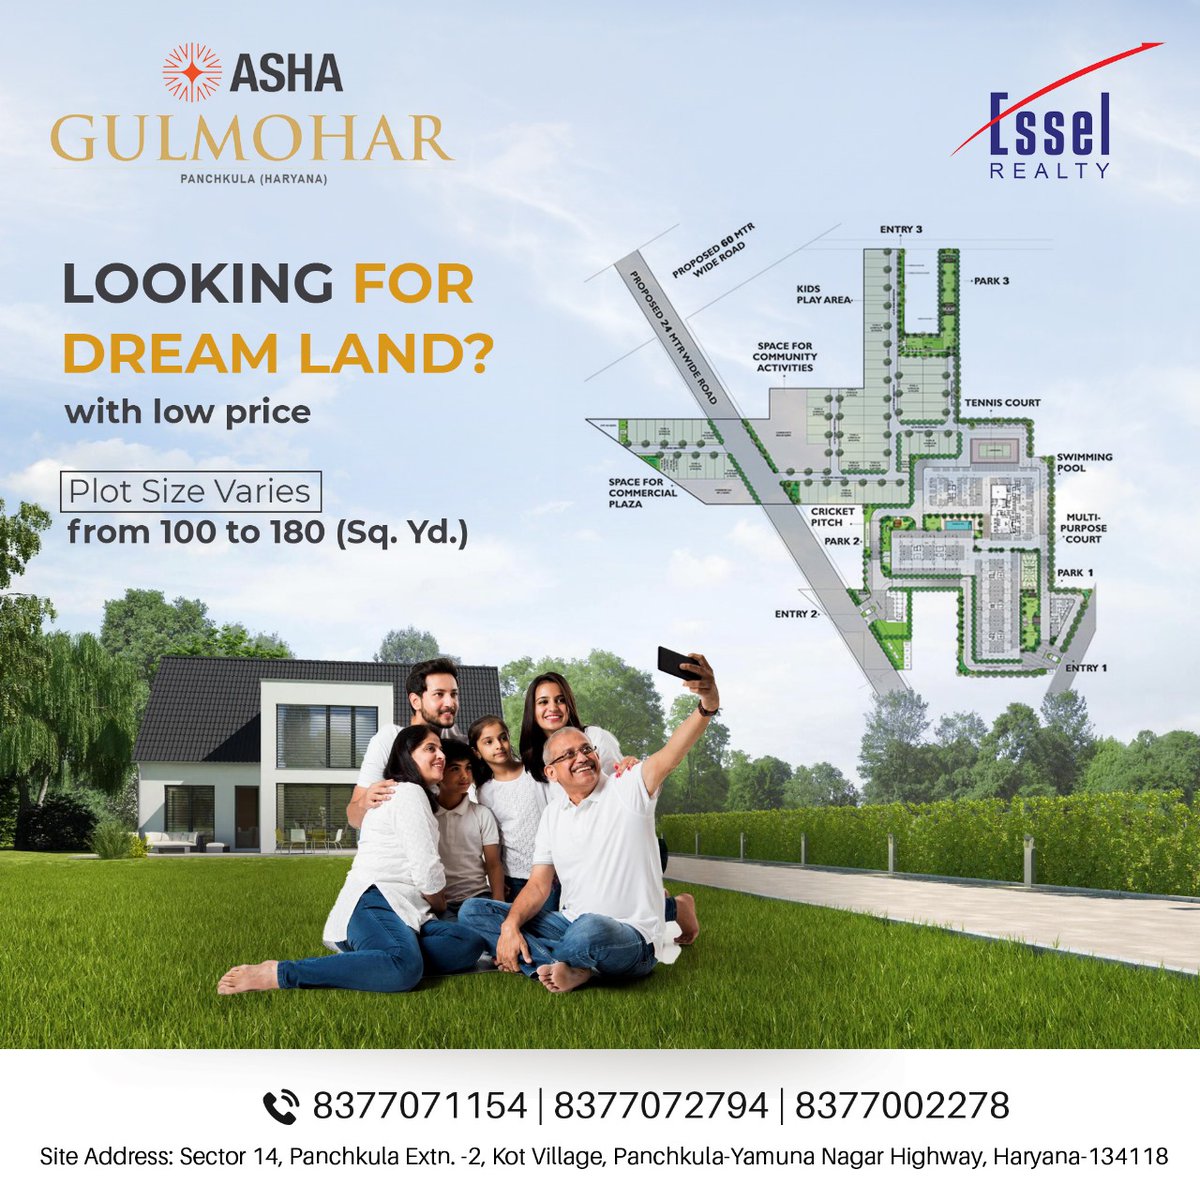 Discover your dream land at an unbeatable price! With plot sizes ranging from 100 to 180 Sq. Yd., now is the perfect time to book your plot and turn your dreams into reality.

To Know More:
Call 📞: +91 8377072794
esselrealty.com/landingpages/a…
.
.
.
#EsselRealty #UnbeatablePrice #Plot